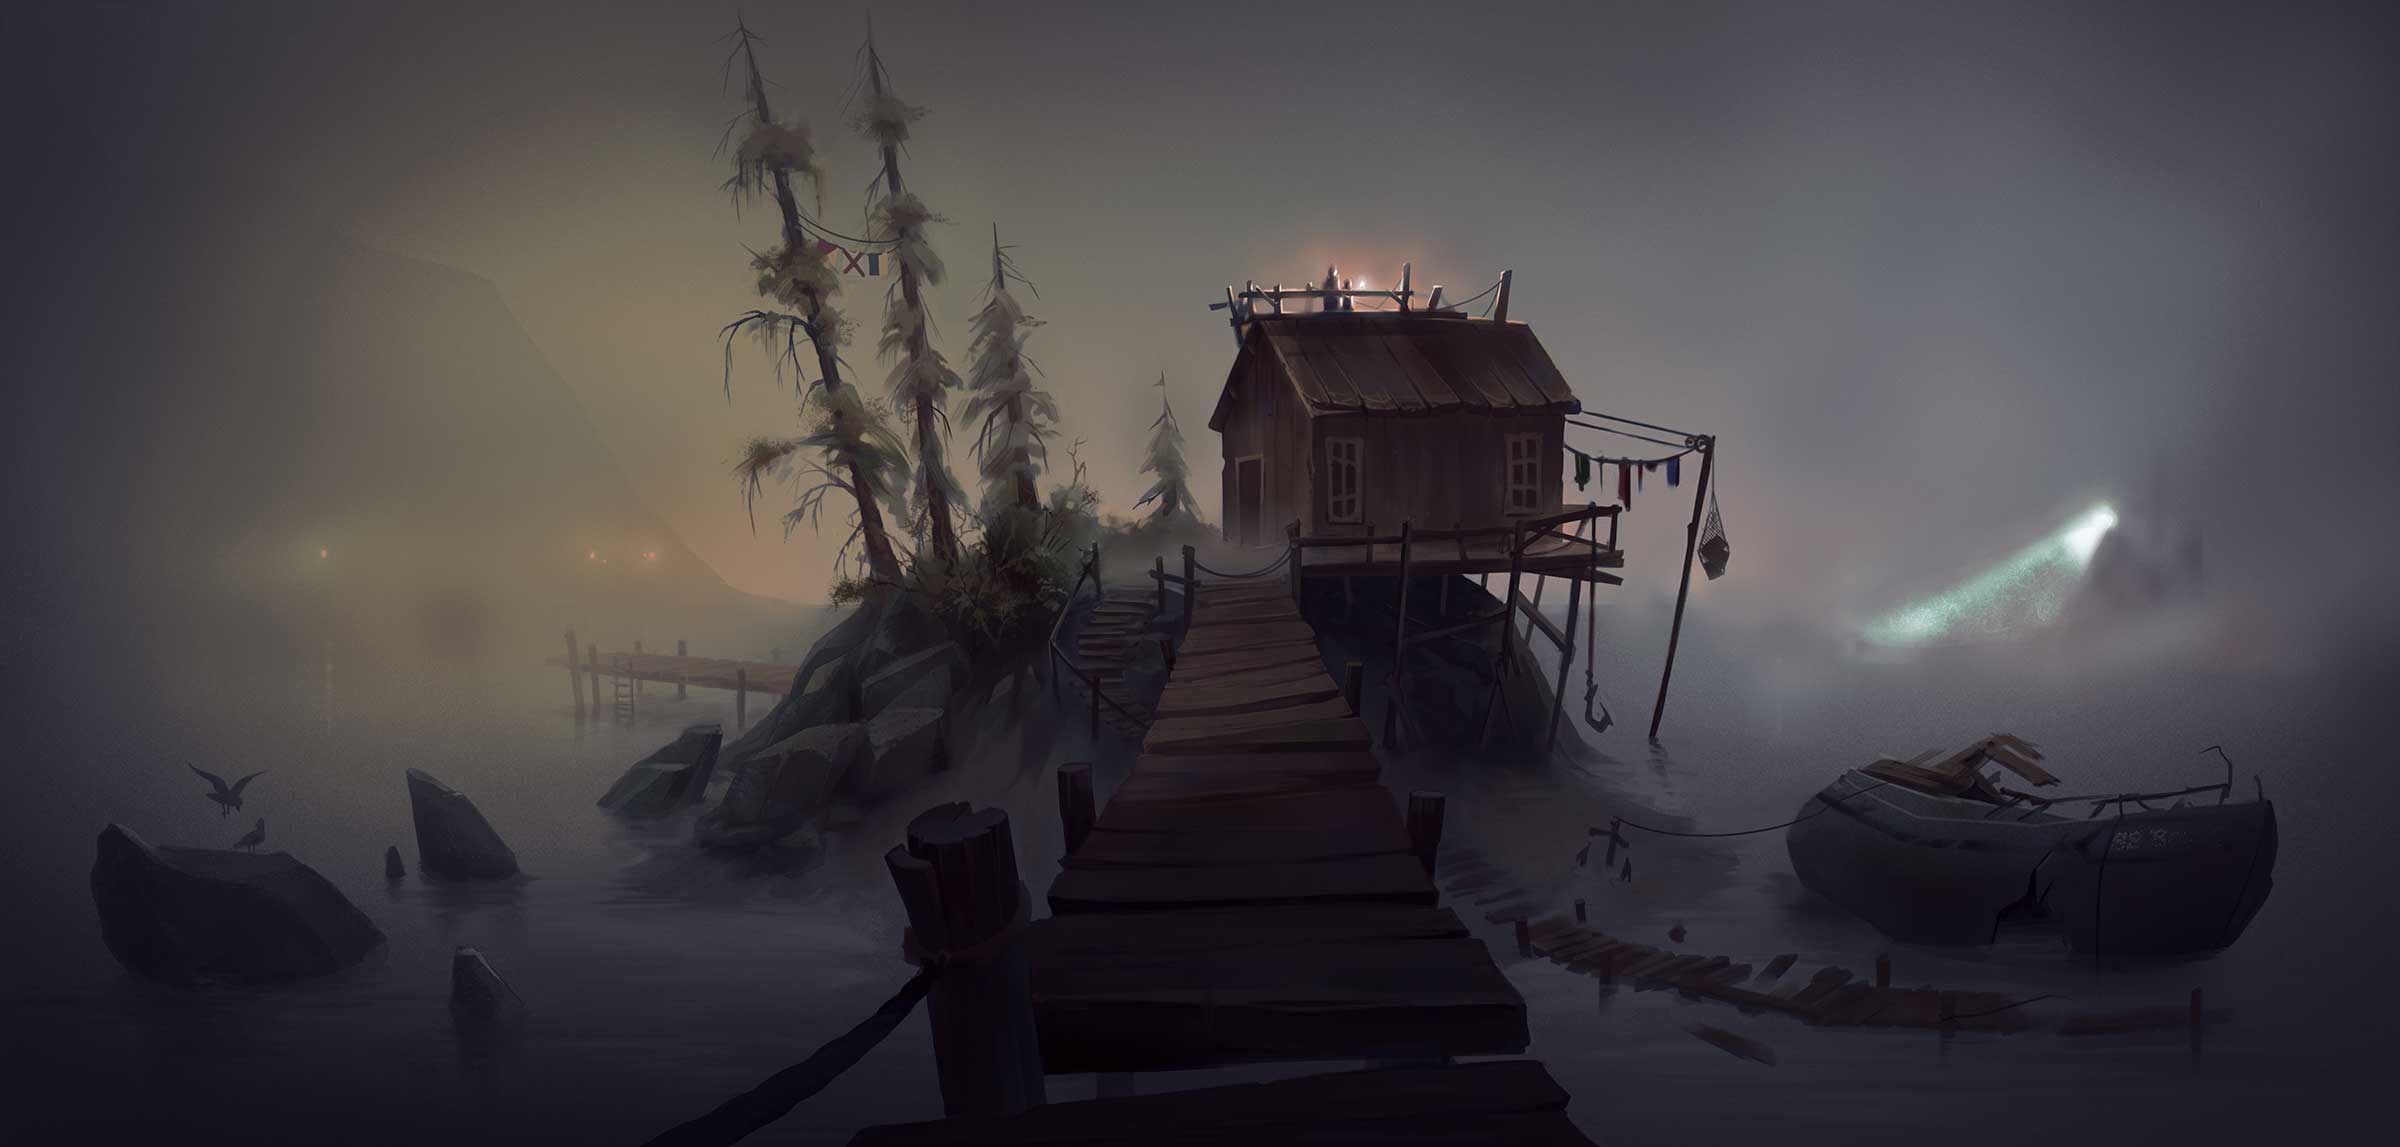 A rickety house stands on a rock within a gloomy swamp environment.